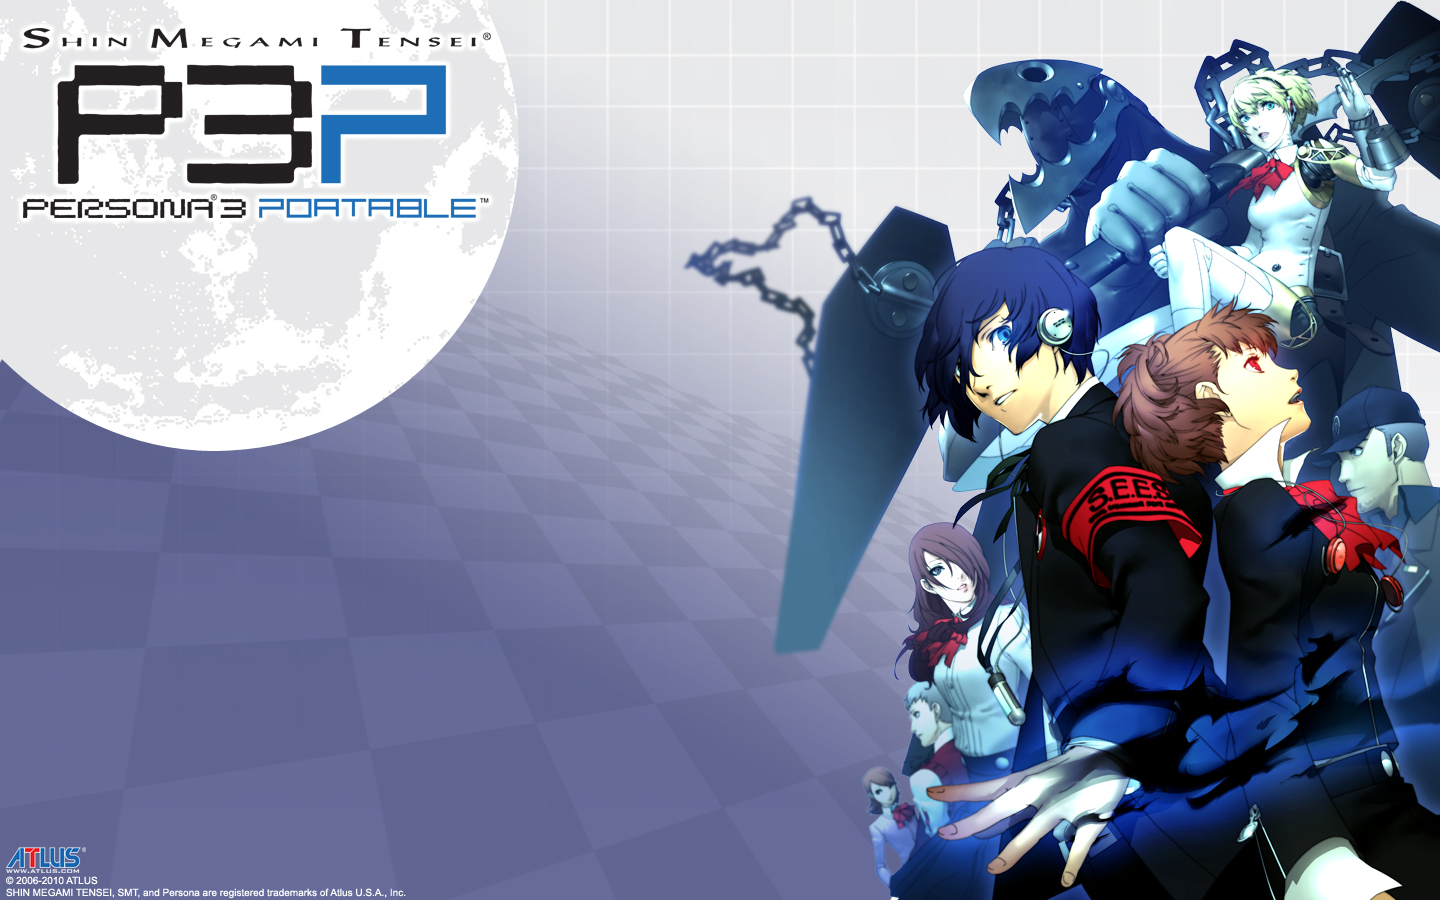 Persona 3 Portable Picture - Image Abyss